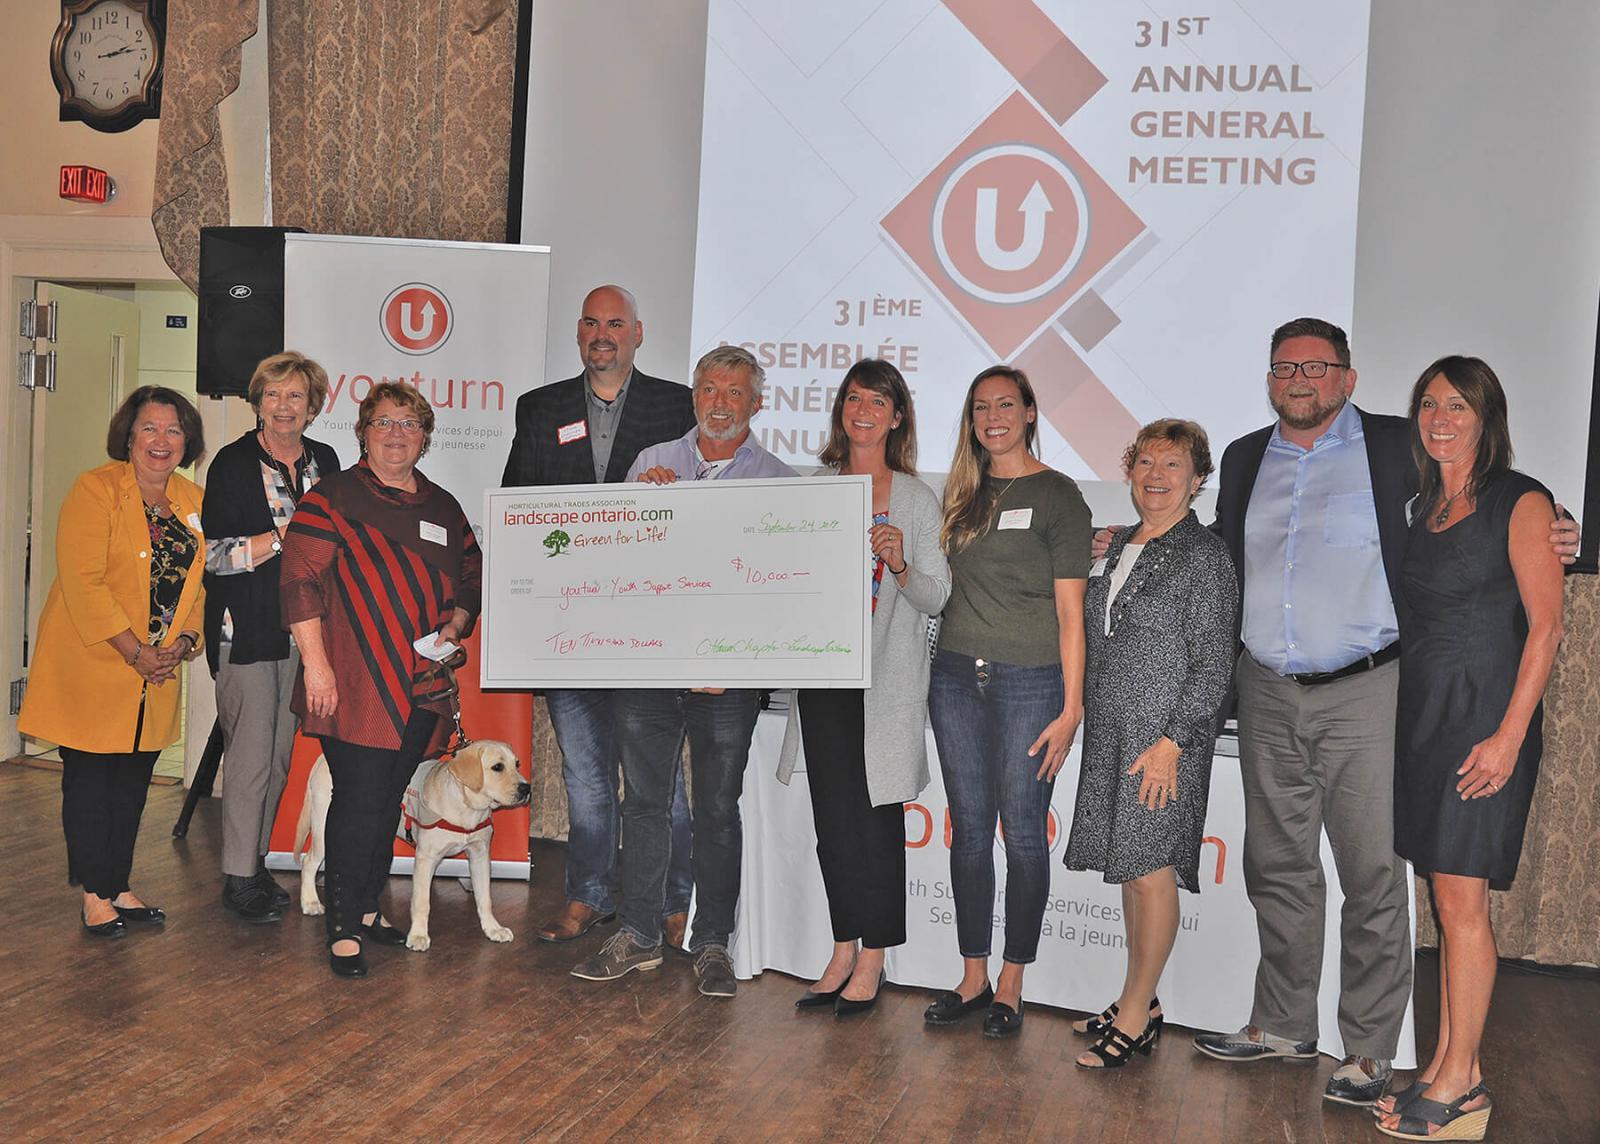 Ottawa Chapter raises $10,000 to support youth